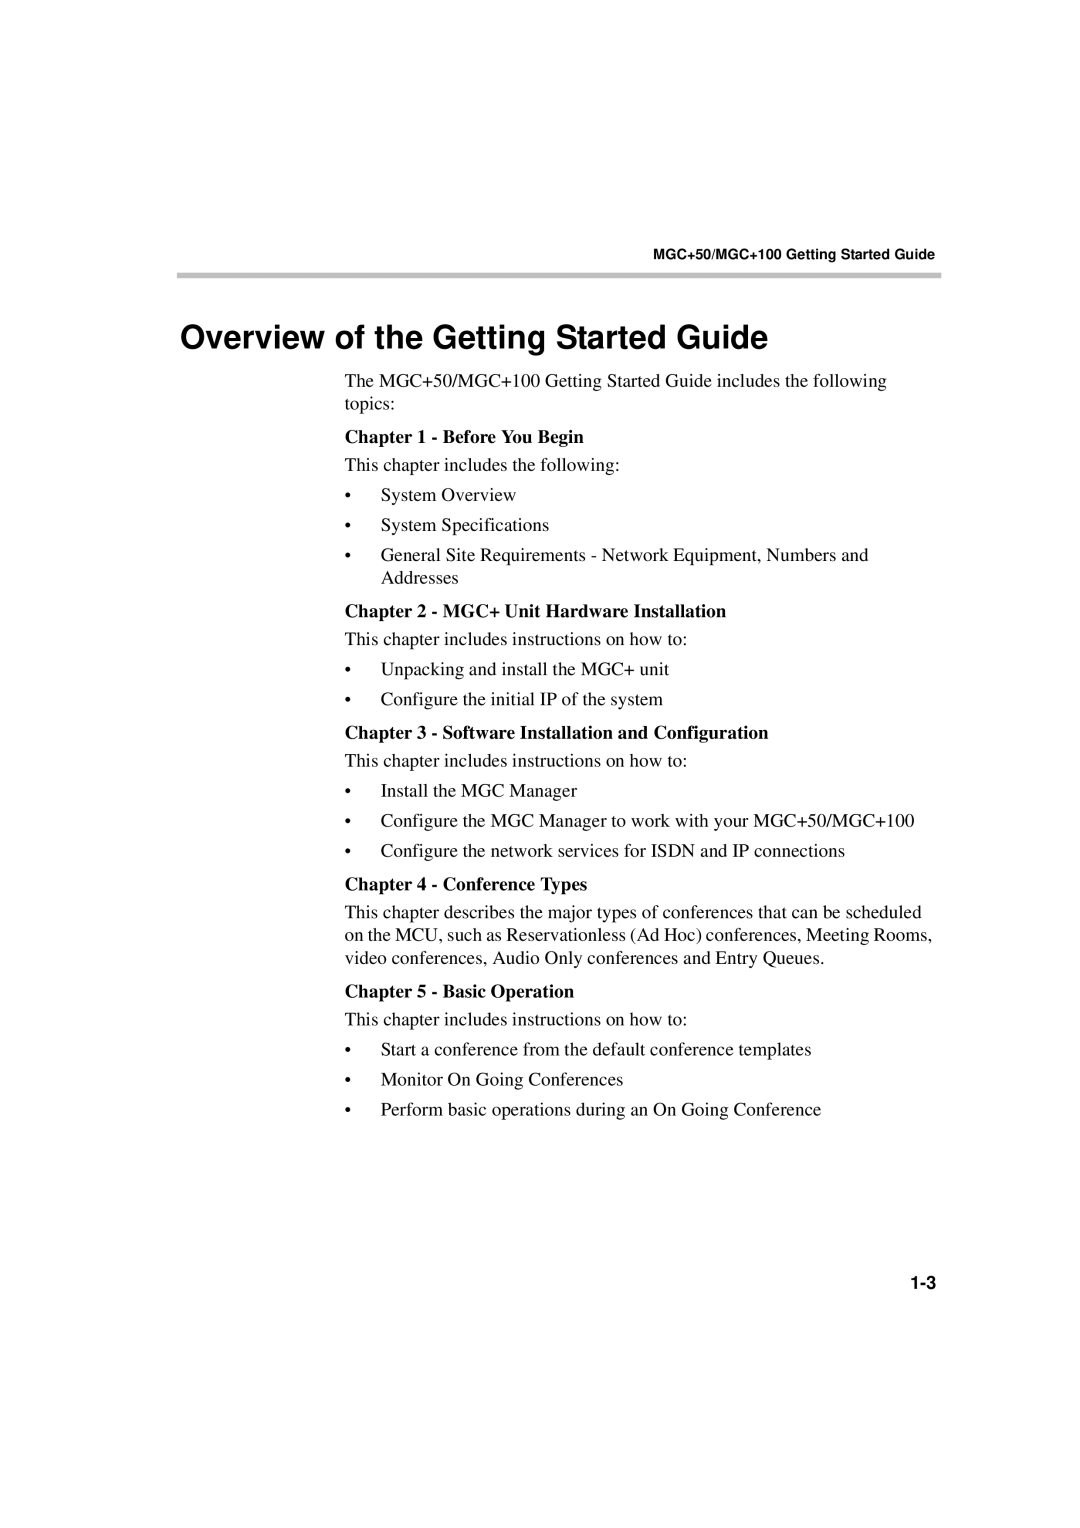 Polycom DOC2231A manual Overview of the Getting Started Guide 